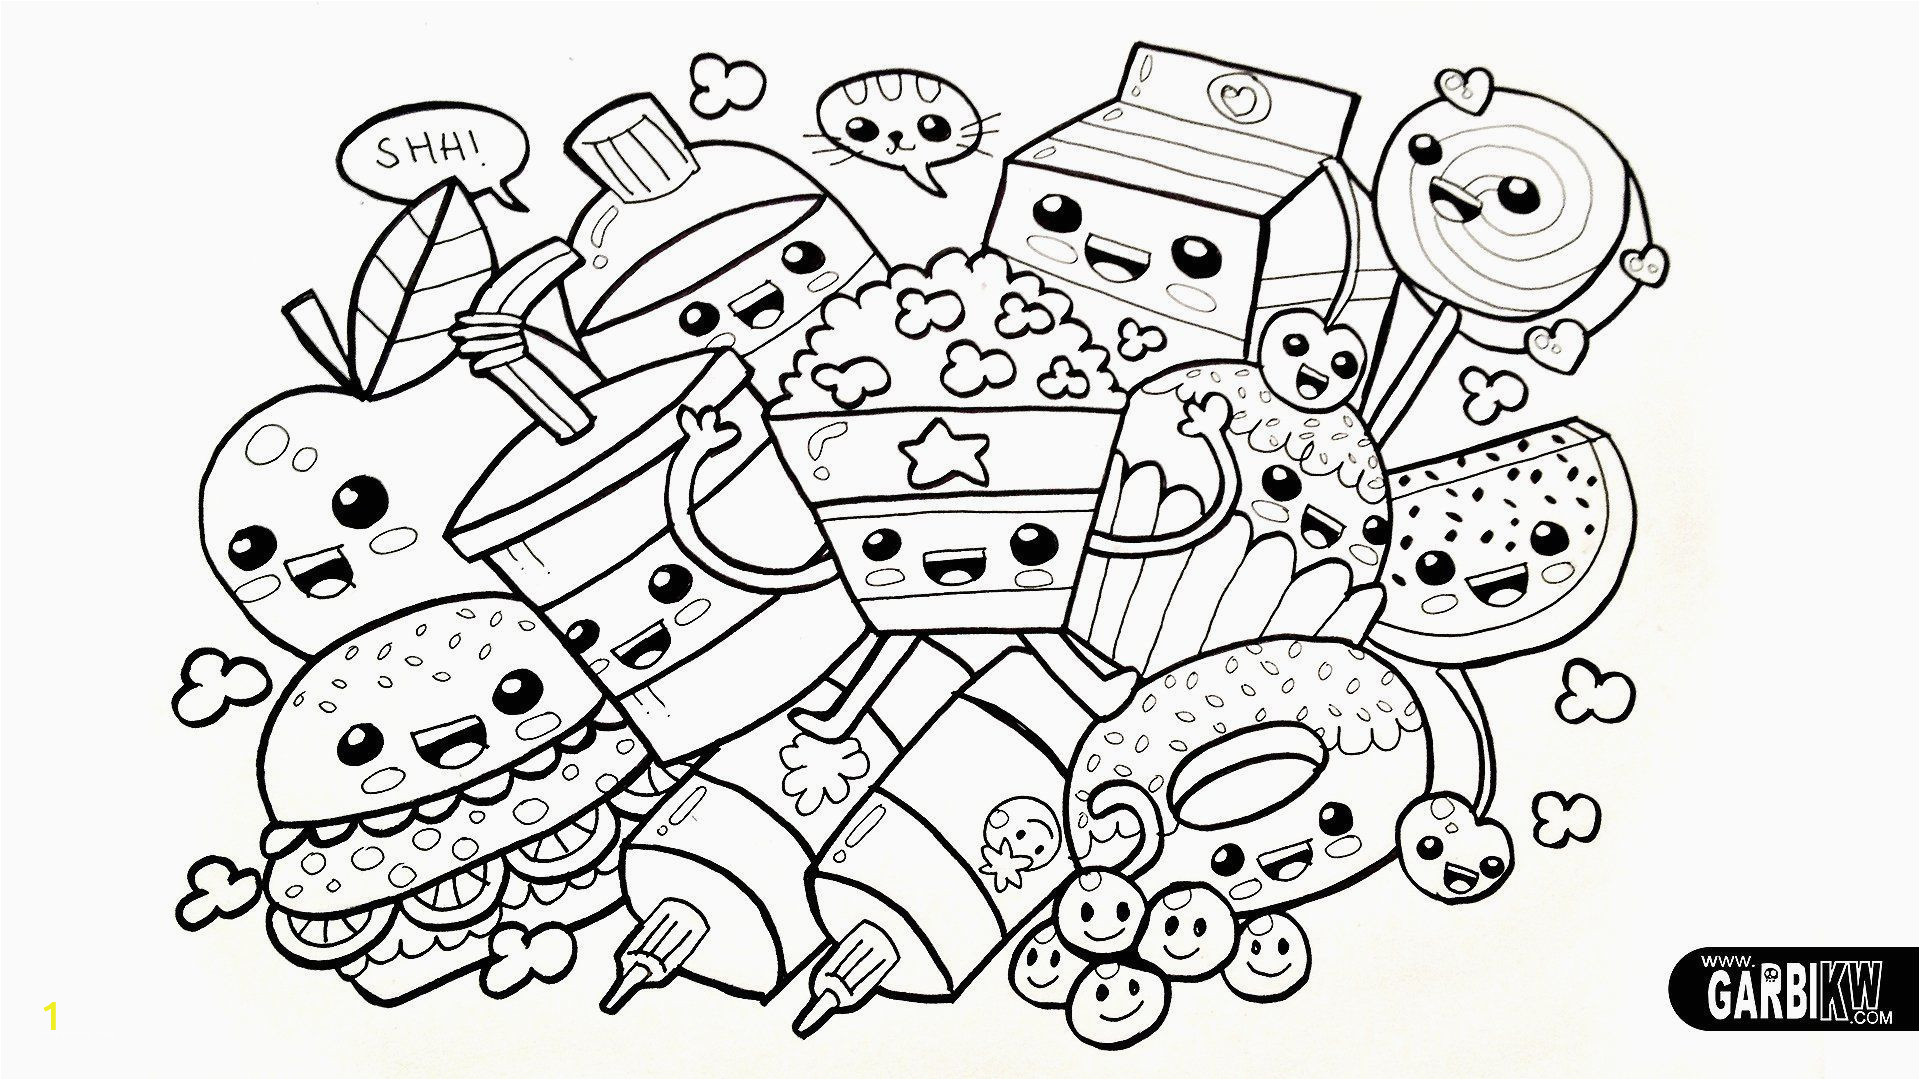 childrens printable colouring pages inspirational coloring pages cartoons printable in 2020 of childrens printable colouring pages